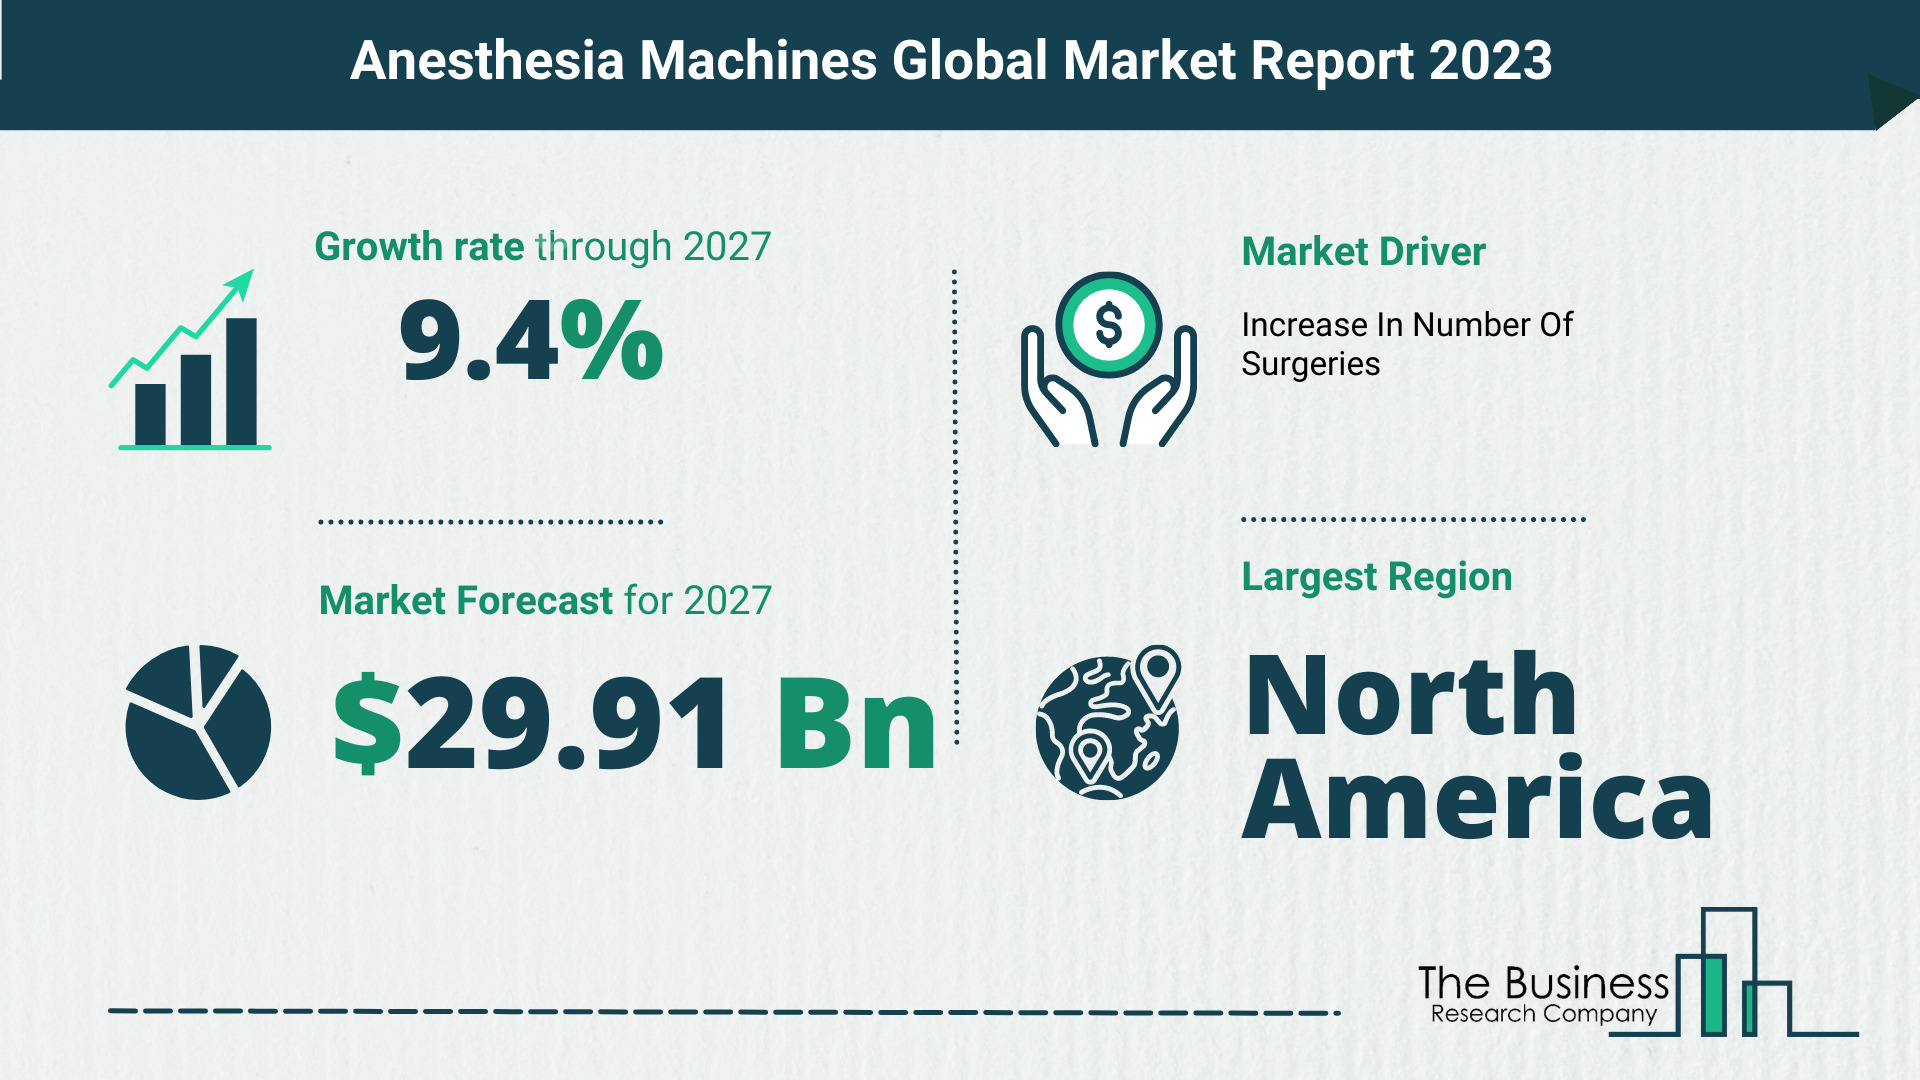 Anesthesia Machines Market Overview: Market Size, Drivers And Trends